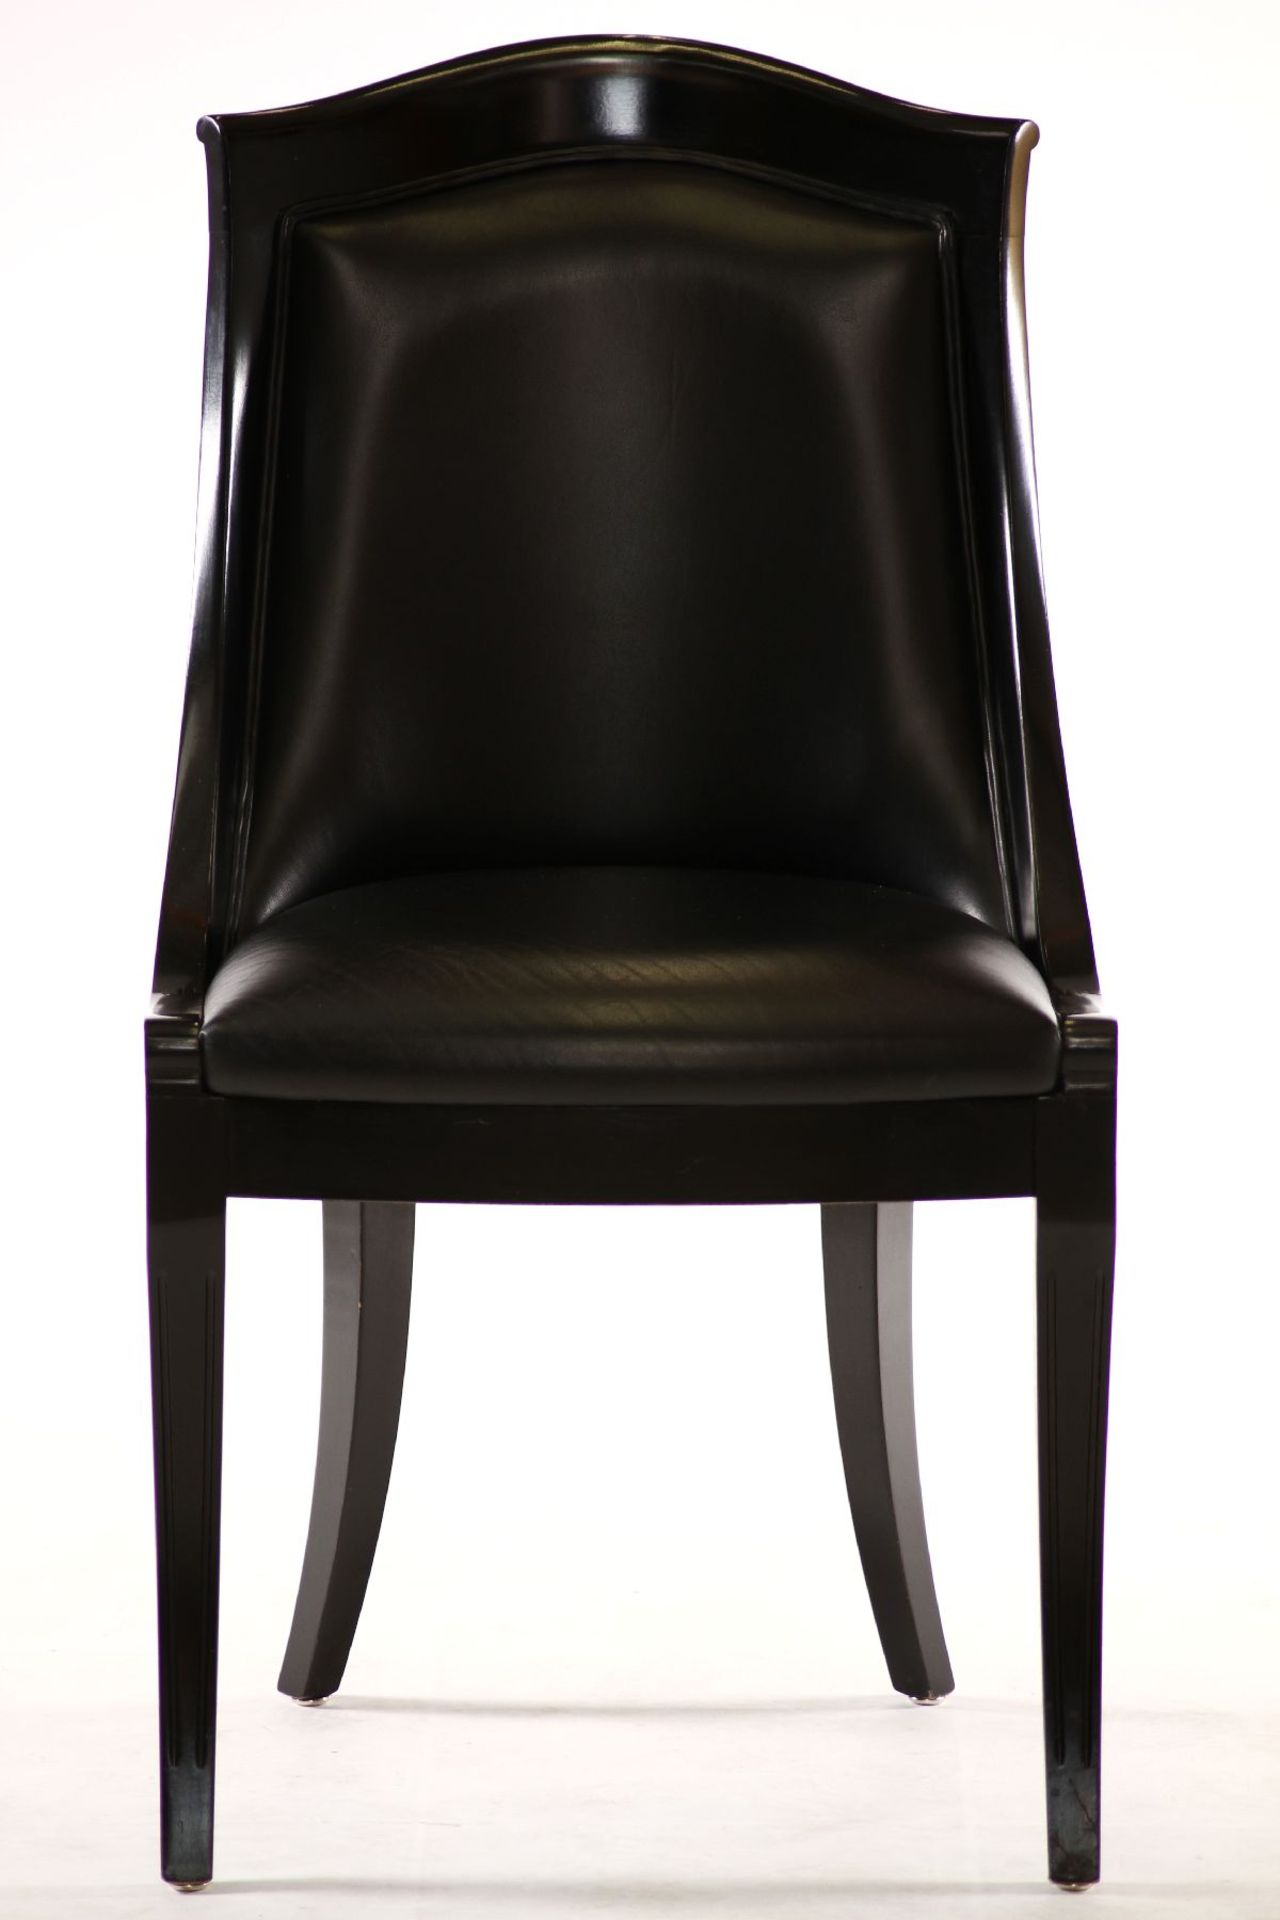 4 chairs, in Art Deco style, solid wood frames, black lacquered, black leather covers,comfortable - Image 2 of 3